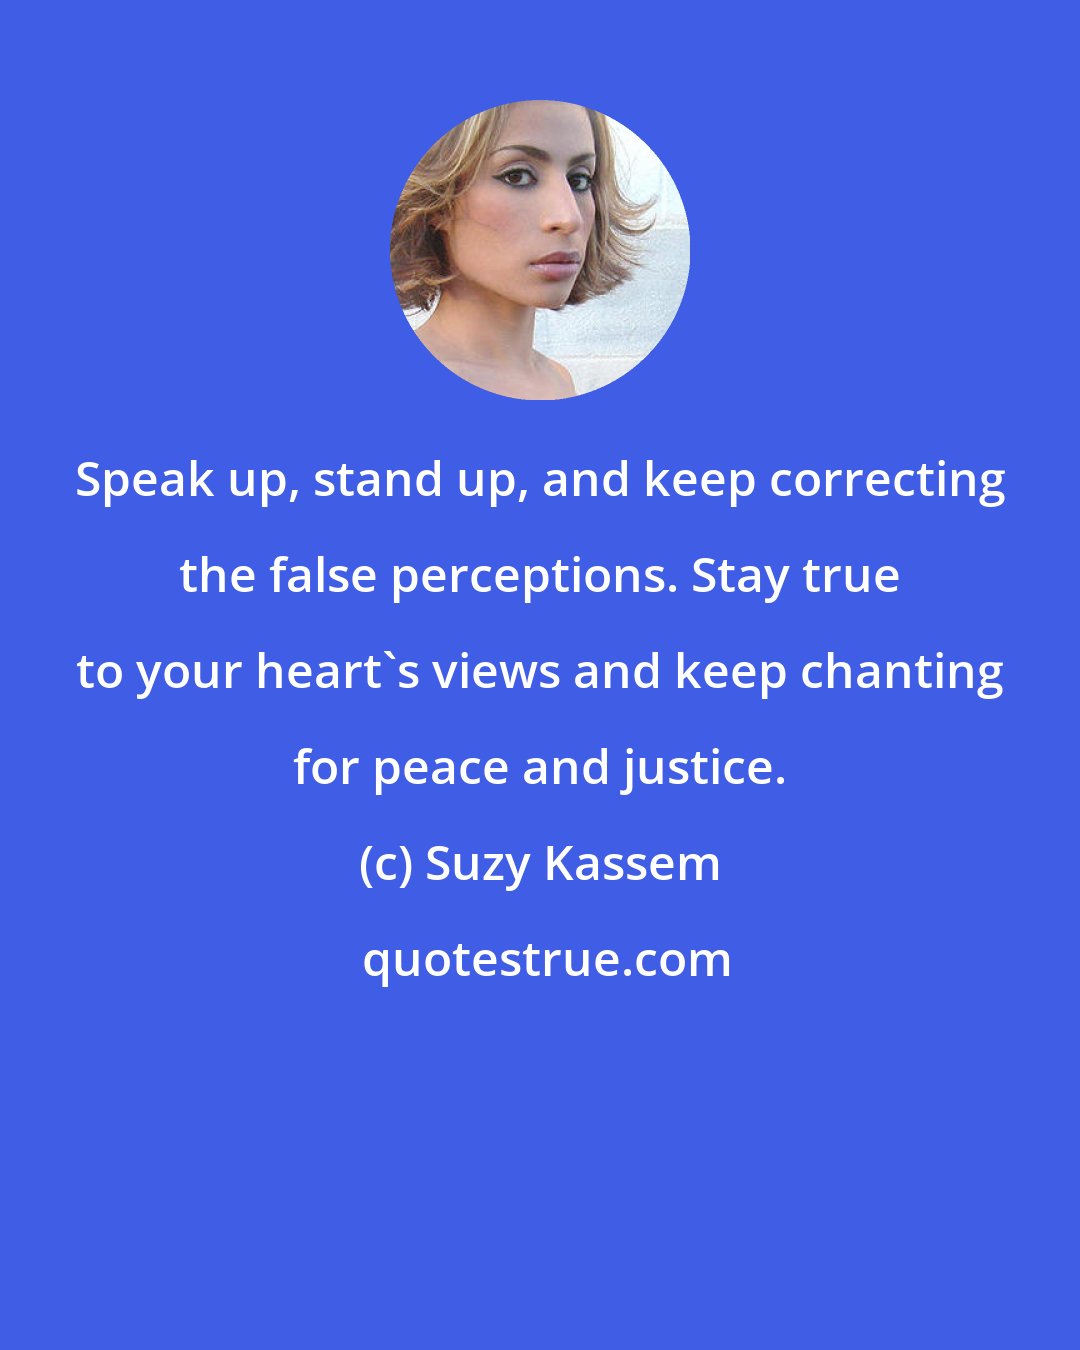 Suzy Kassem: Speak up, stand up, and keep correcting the false perceptions. Stay true to your heart's views and keep chanting for peace and justice.